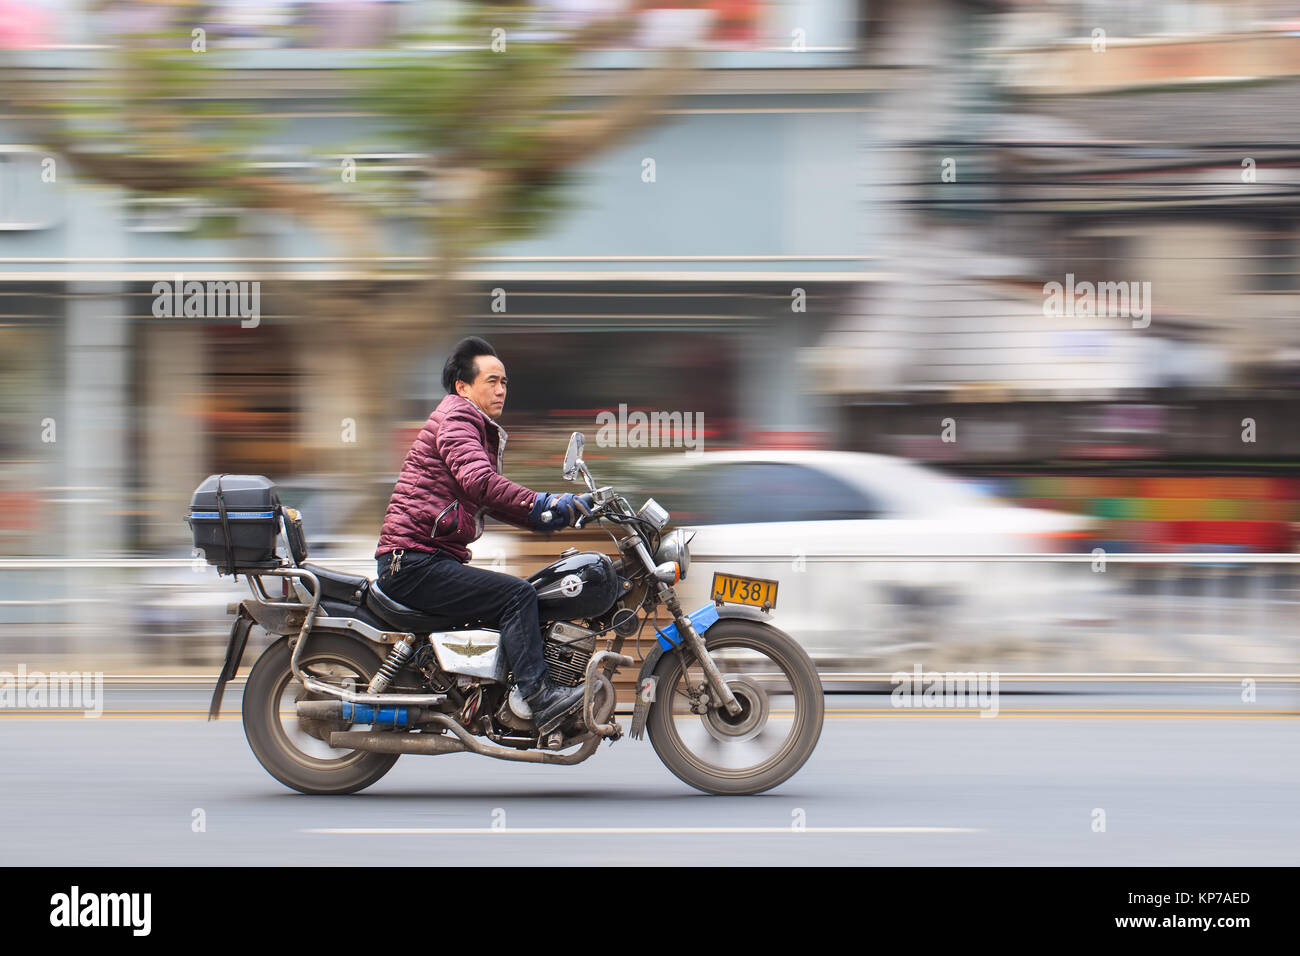 YIWU-CHINA-JAN. 15, 2016. Chinese man on motorcycle on speed. Large cities, like Beijing and Guangzhou, banned motorcycles from urban areas. Stock Photo